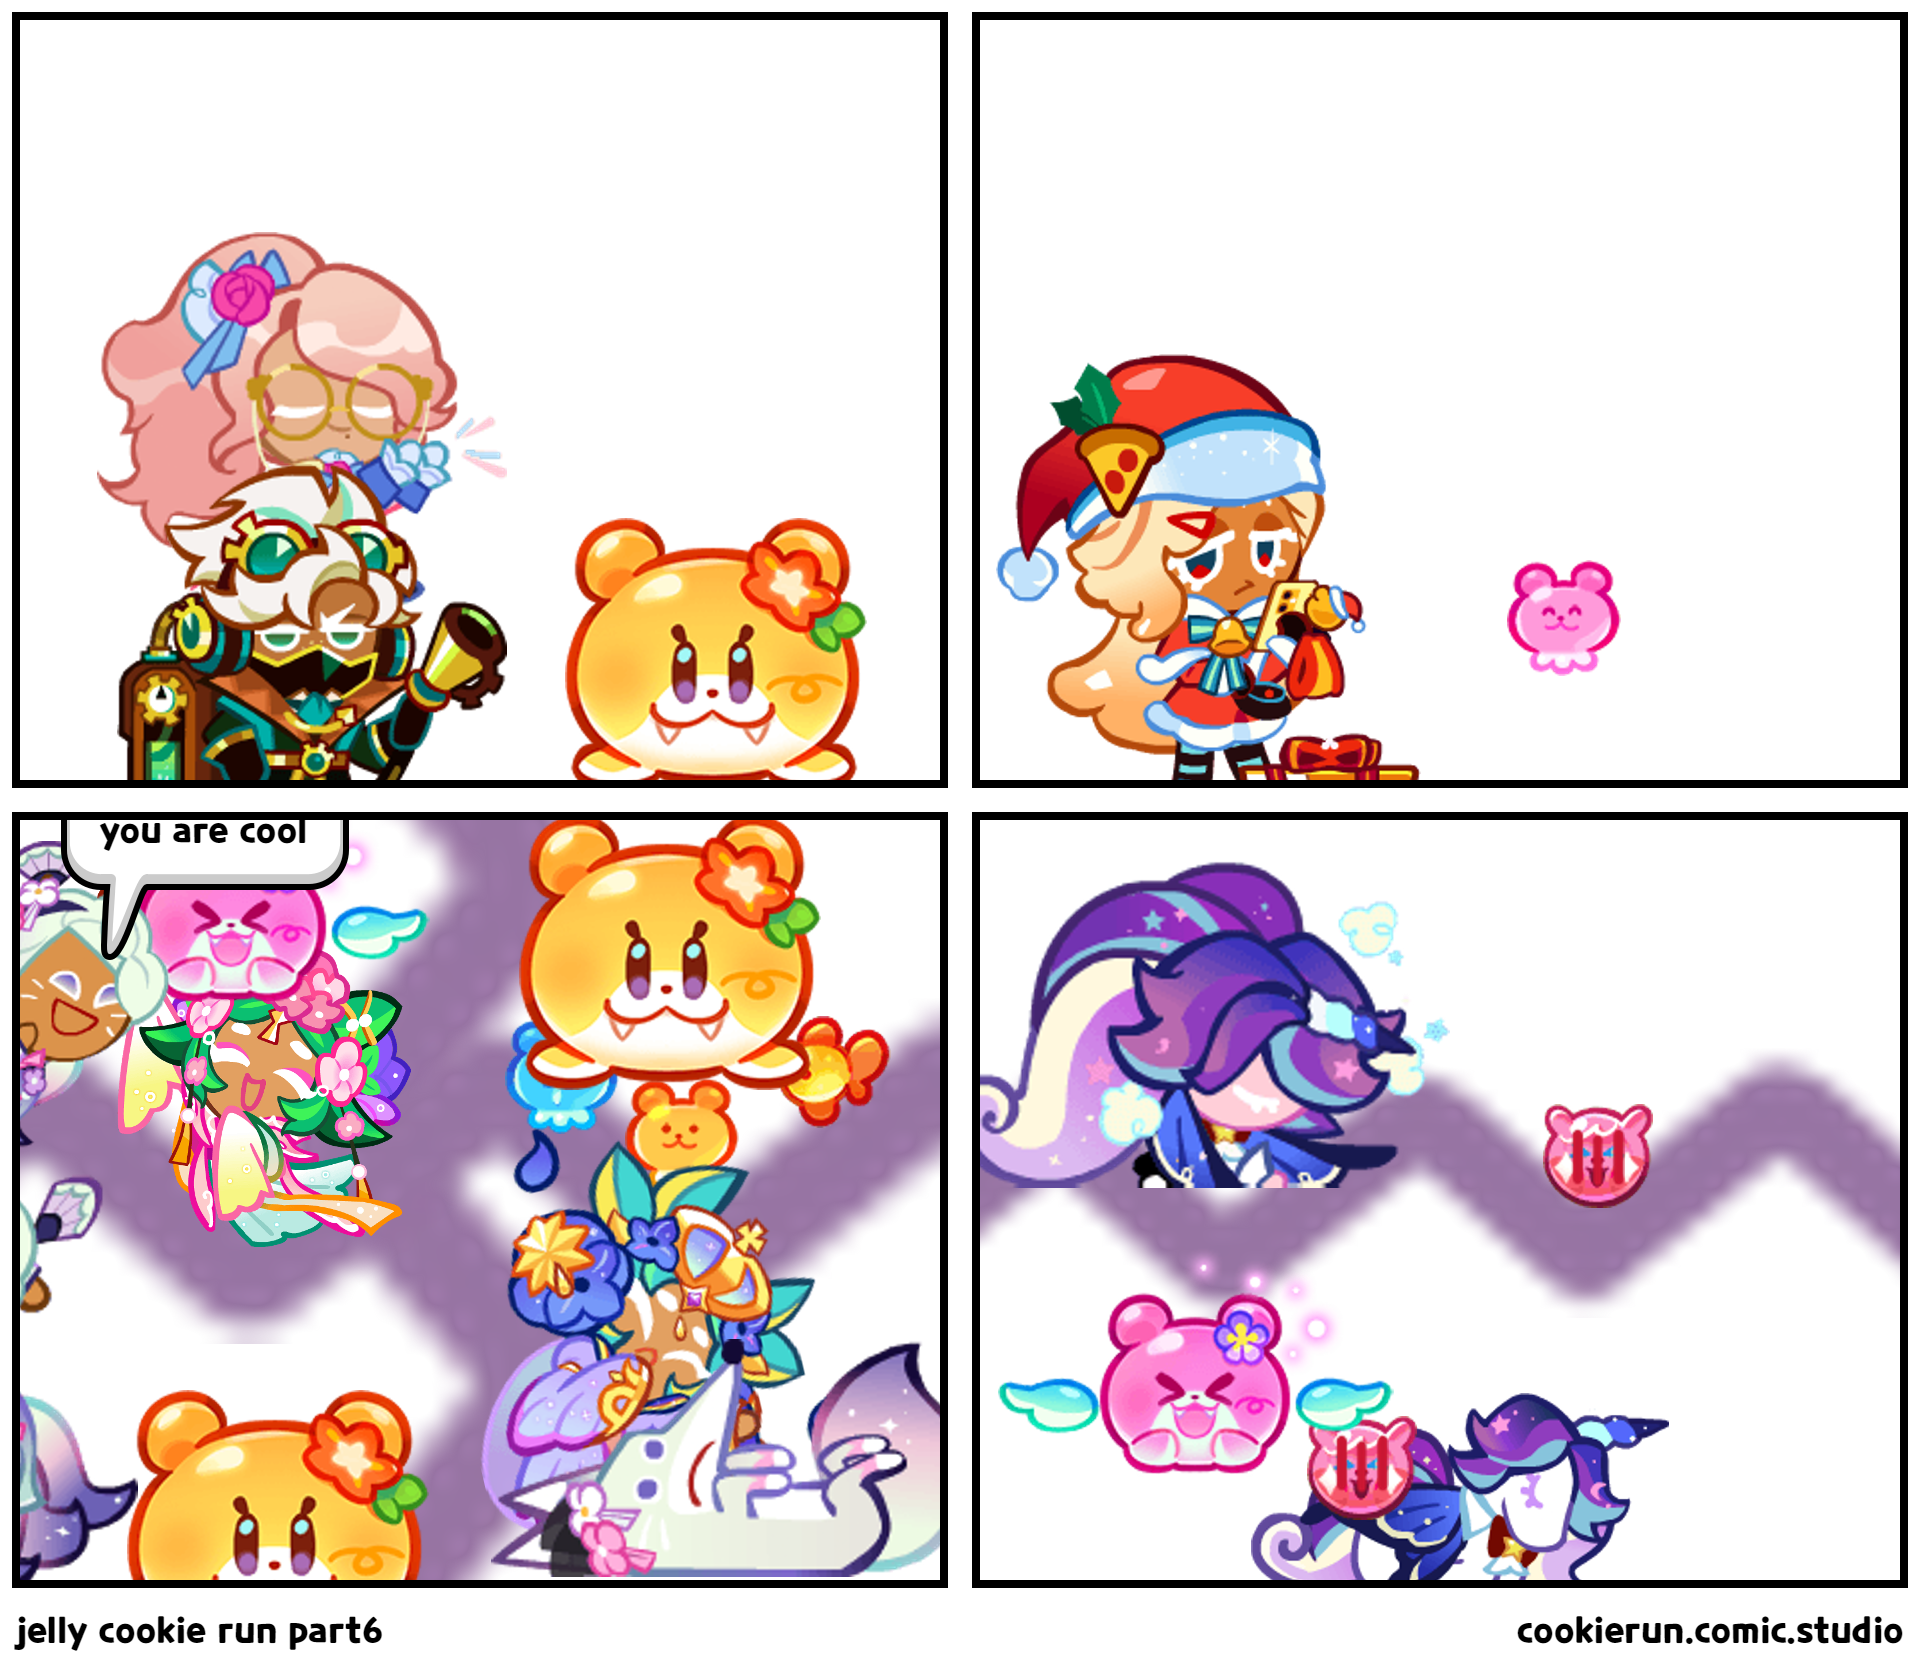 jelly cookie run part6